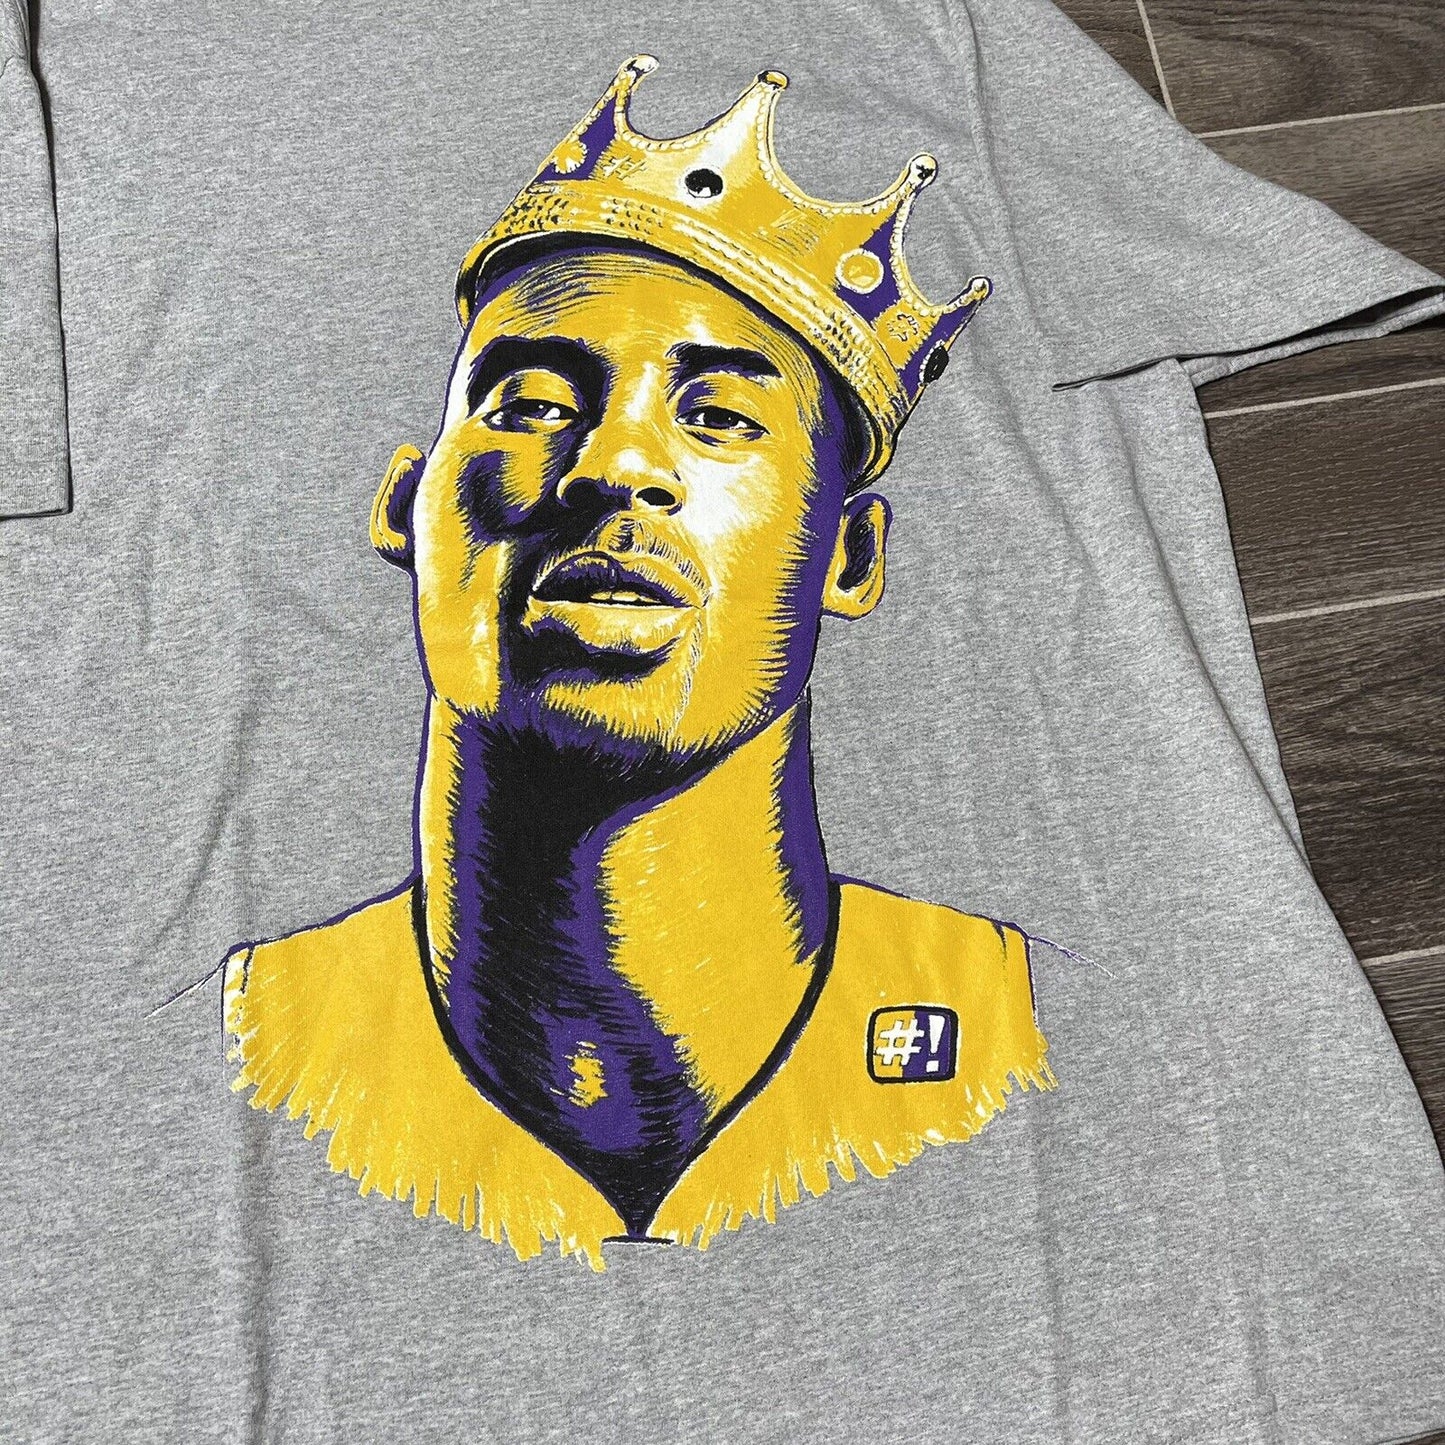 Vintage / Rare Grey Kobe Bryant Forest Lab Only Kings Have Rings Shirt X-Large